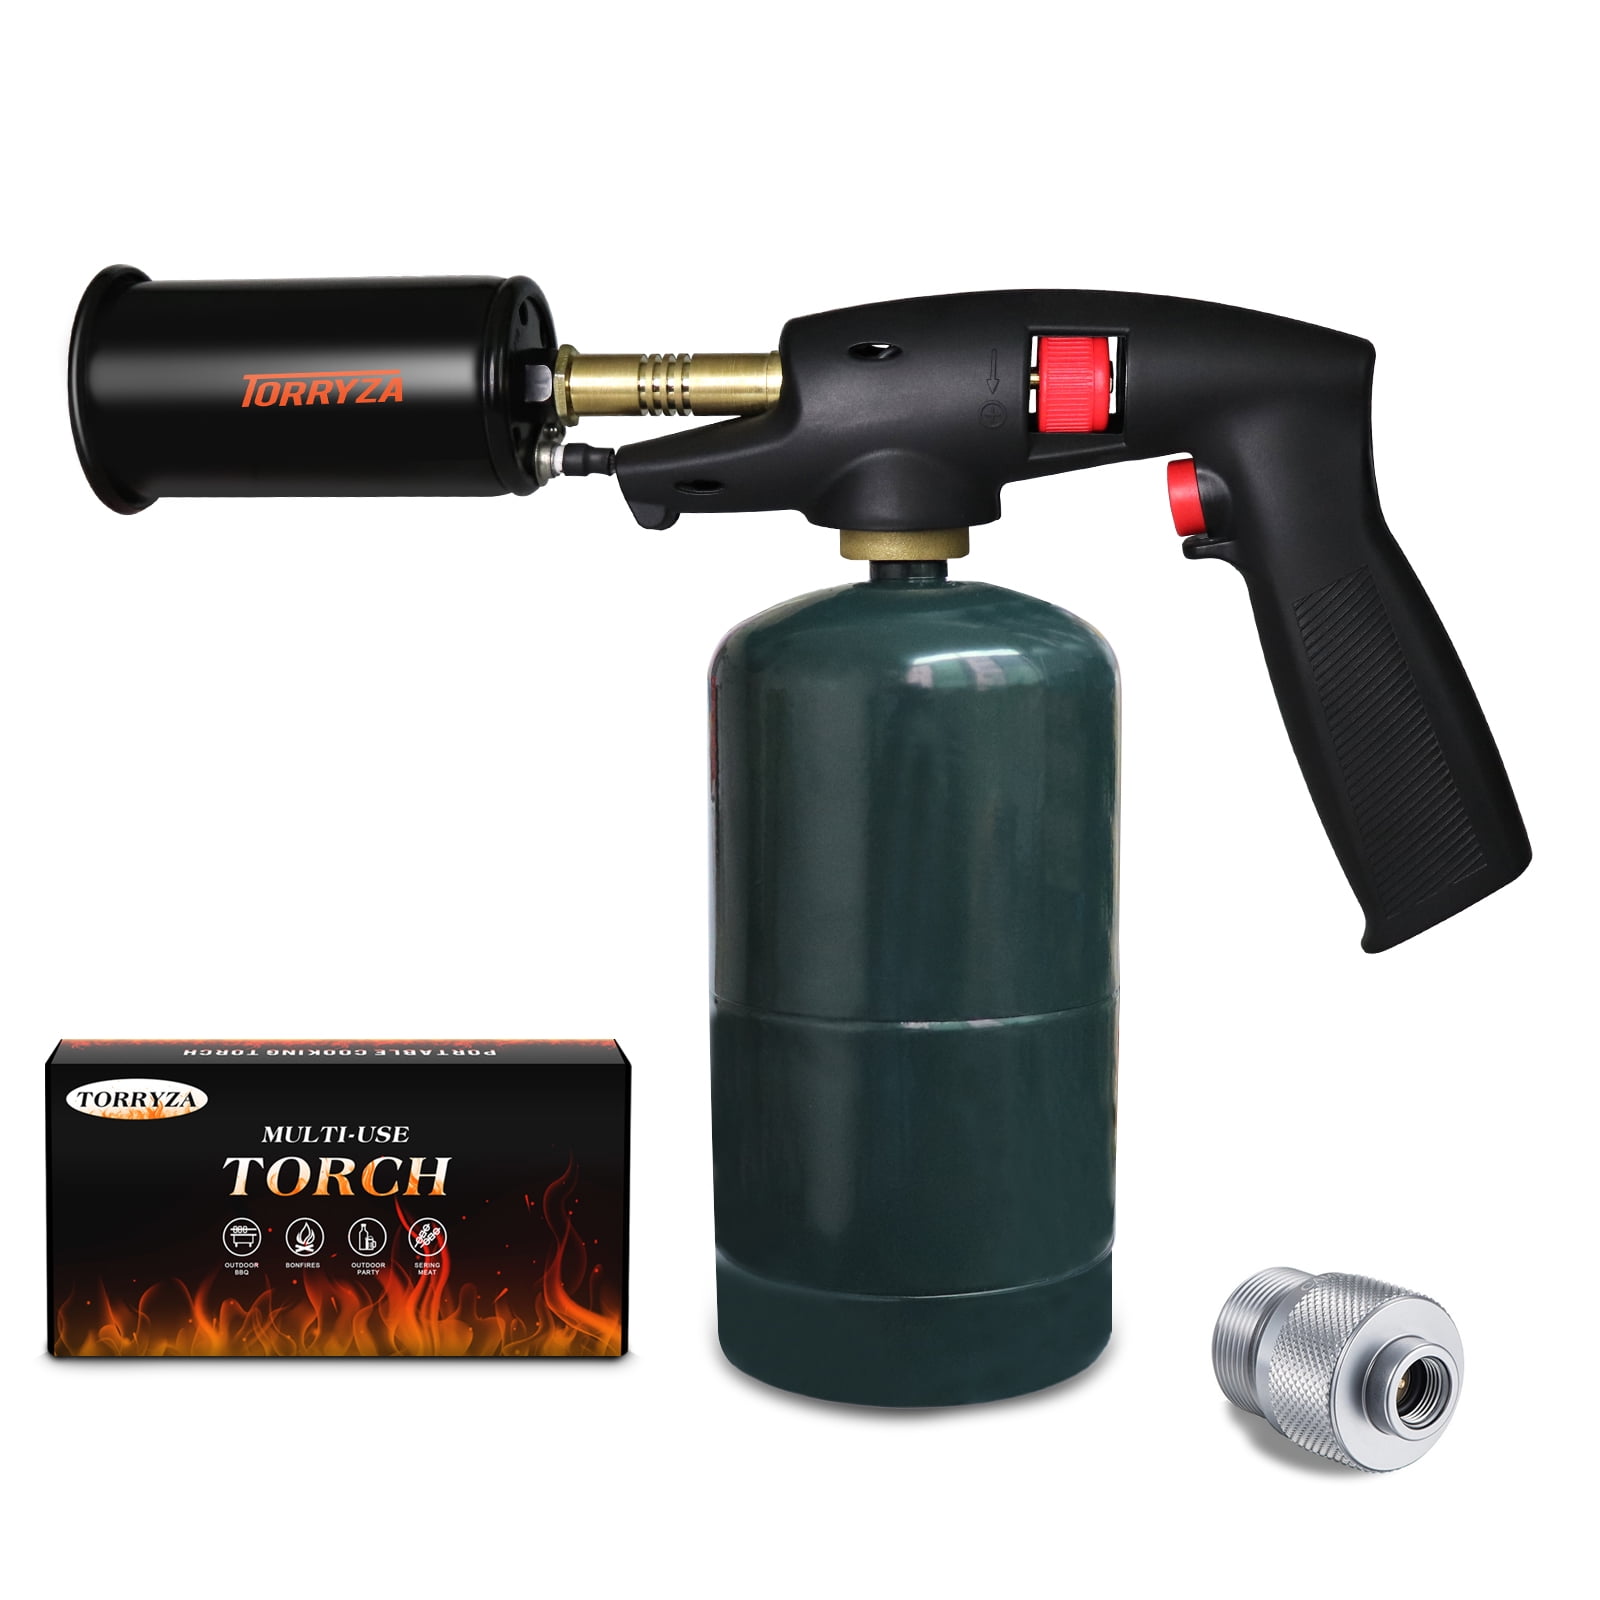 POWERFUL TORRYZA Torch - Sous Vide - Lighter - Culinary Kitchen Grilling - Campfire Starter - BBQ Grill - Searing Steak & Creme Brulee Gun ( Butane or Propane Tank Not Included ) - Walmart.com